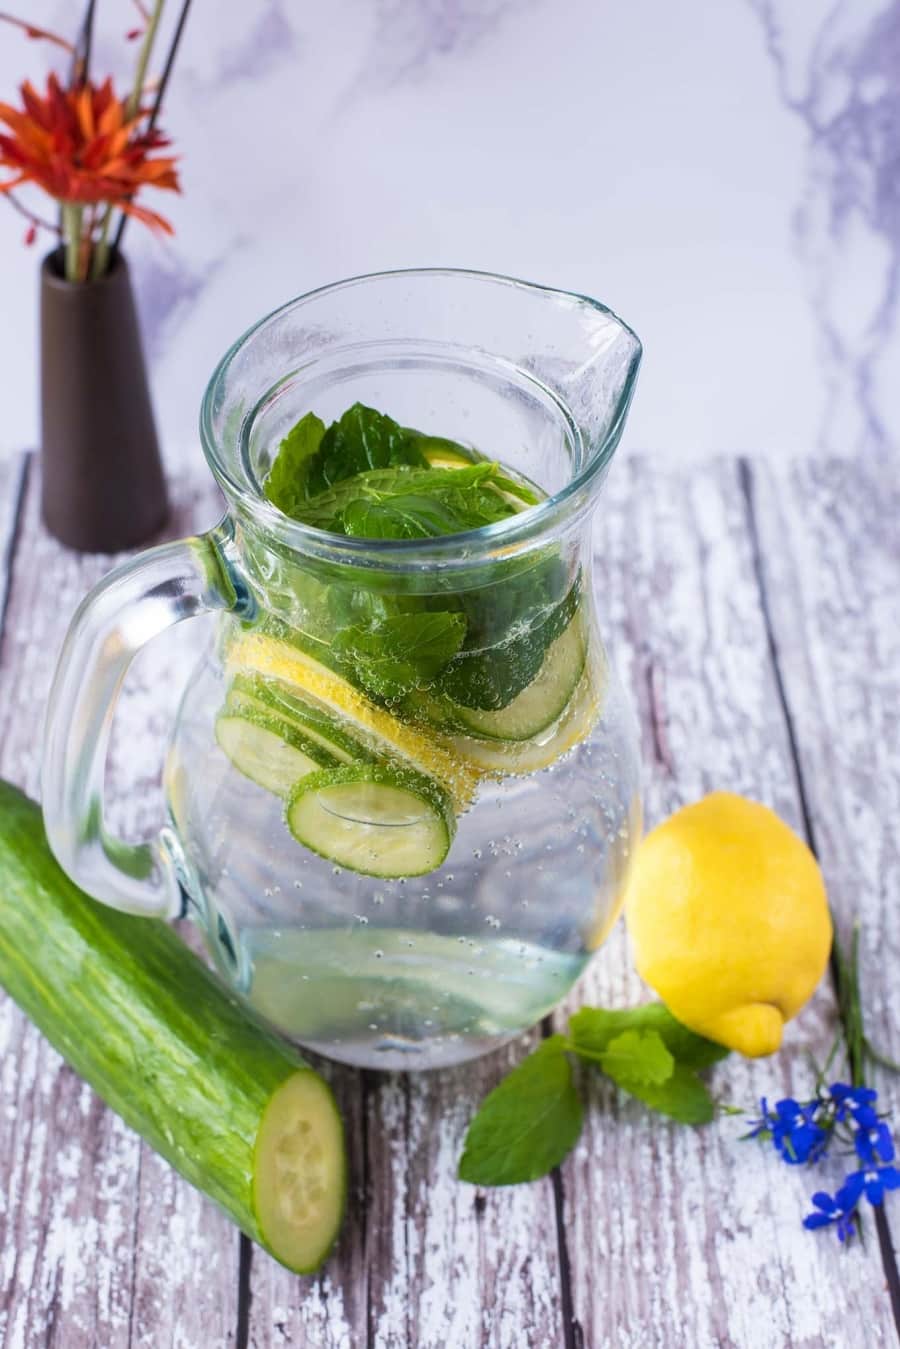 A jug of water containing mint, lemon and cucumber.